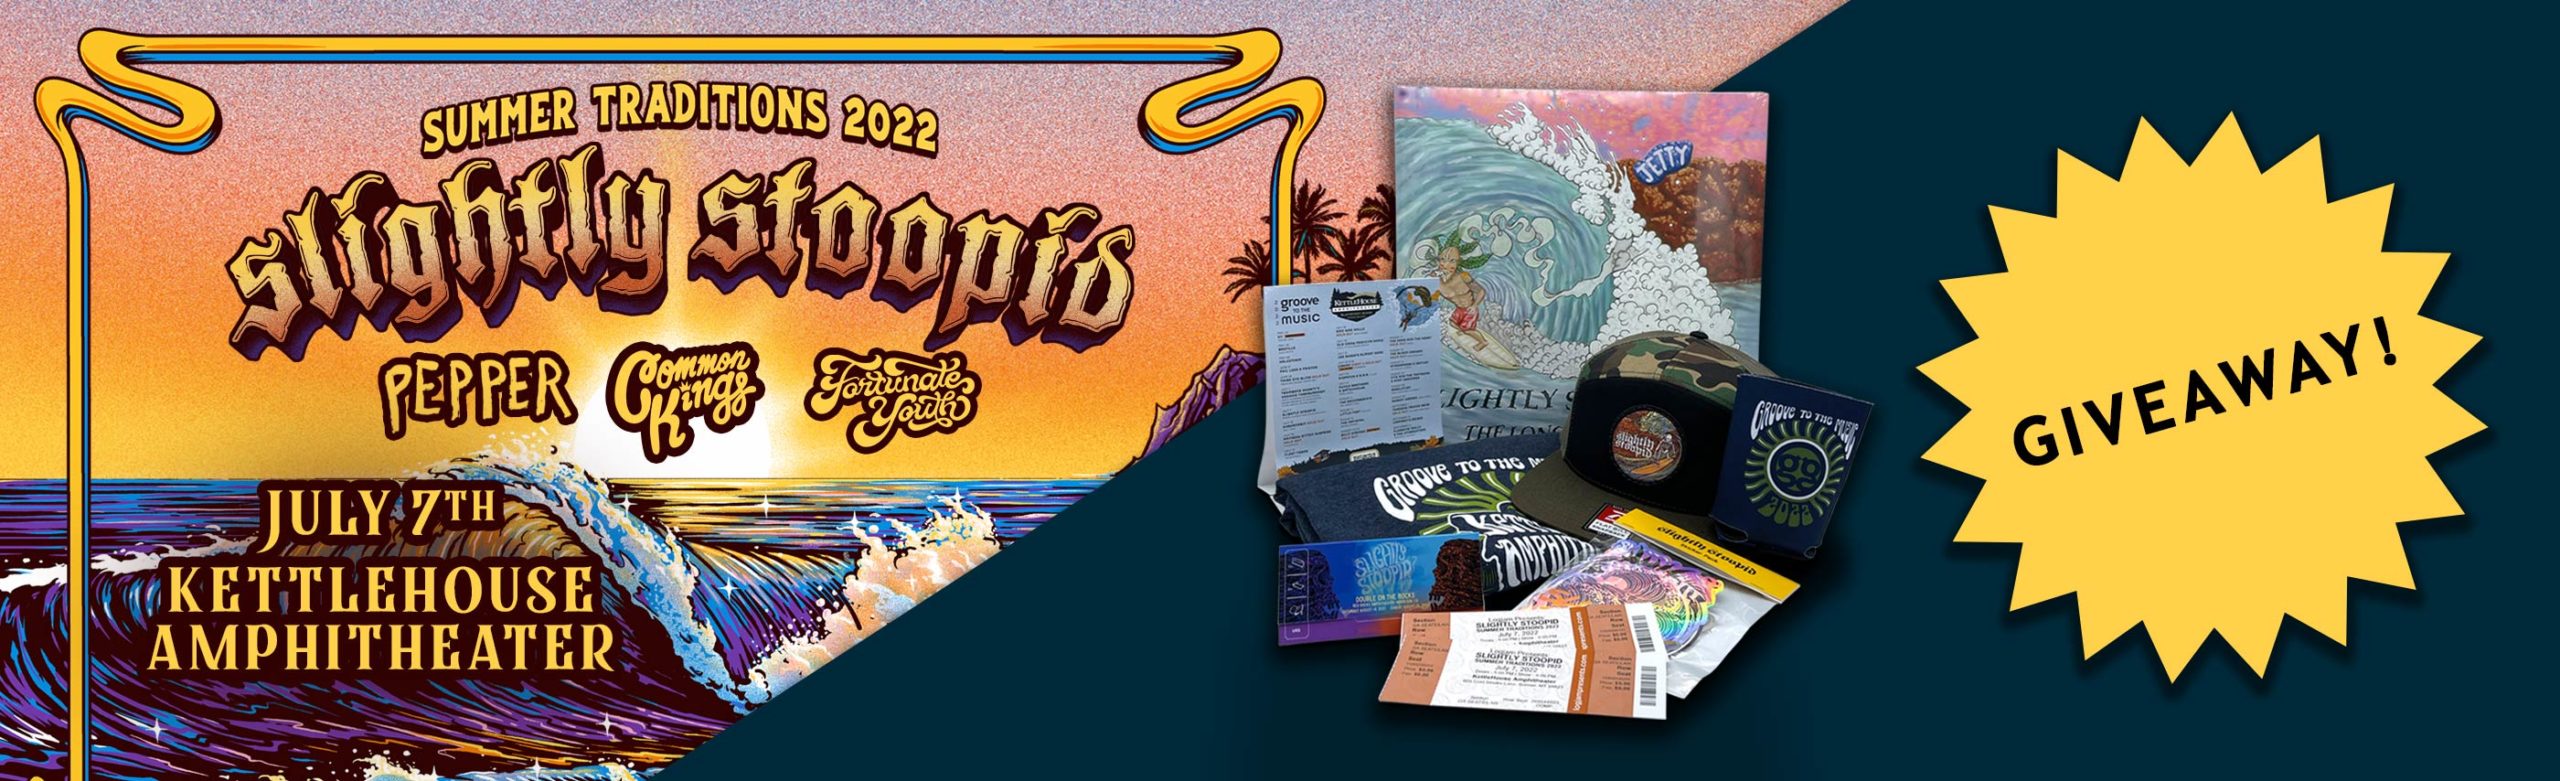 slightly stoopid giveaway